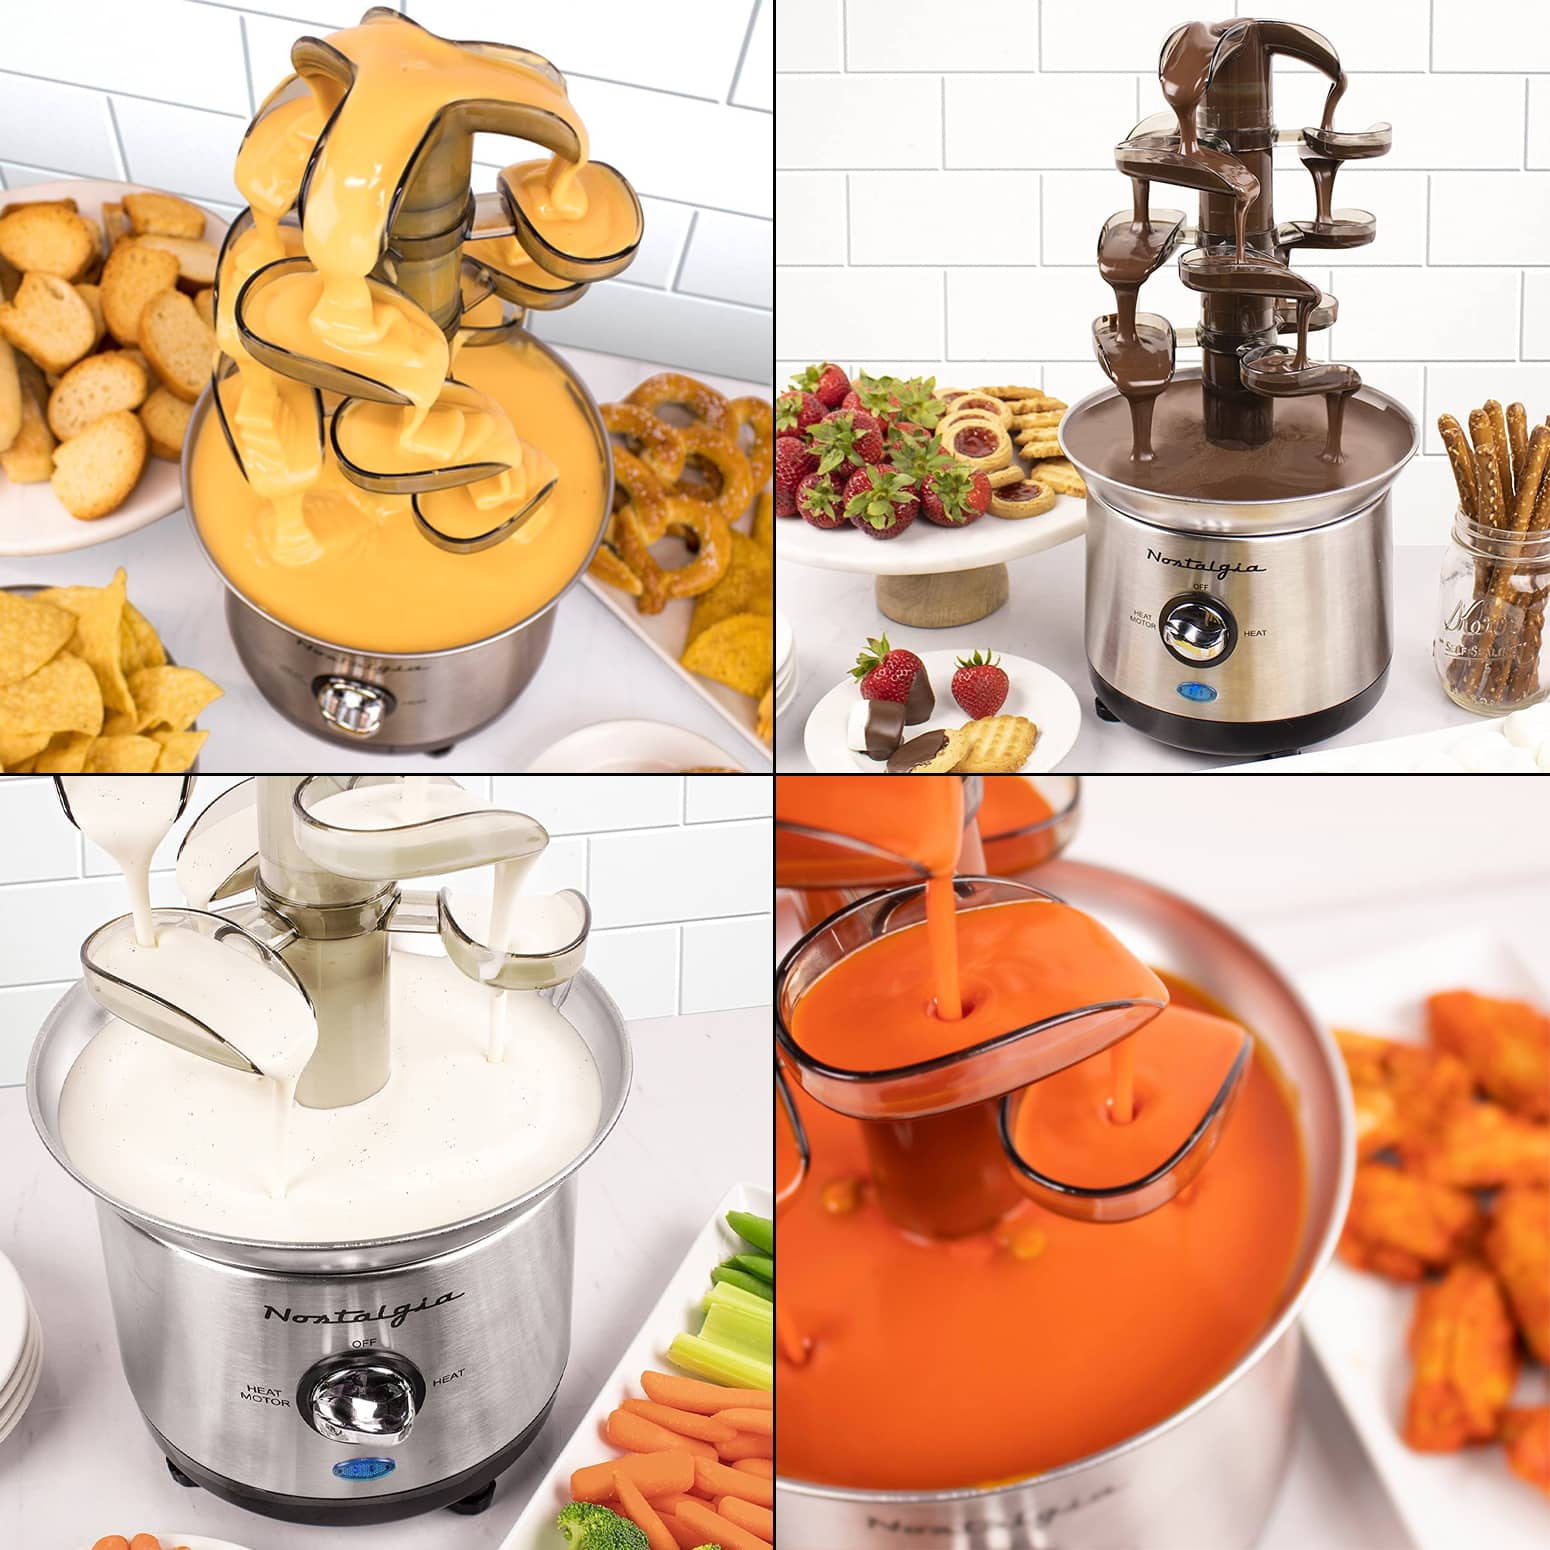 Cascading Fondue Fountain - Chocolate, Cheese, Ranch, Sauces, and More